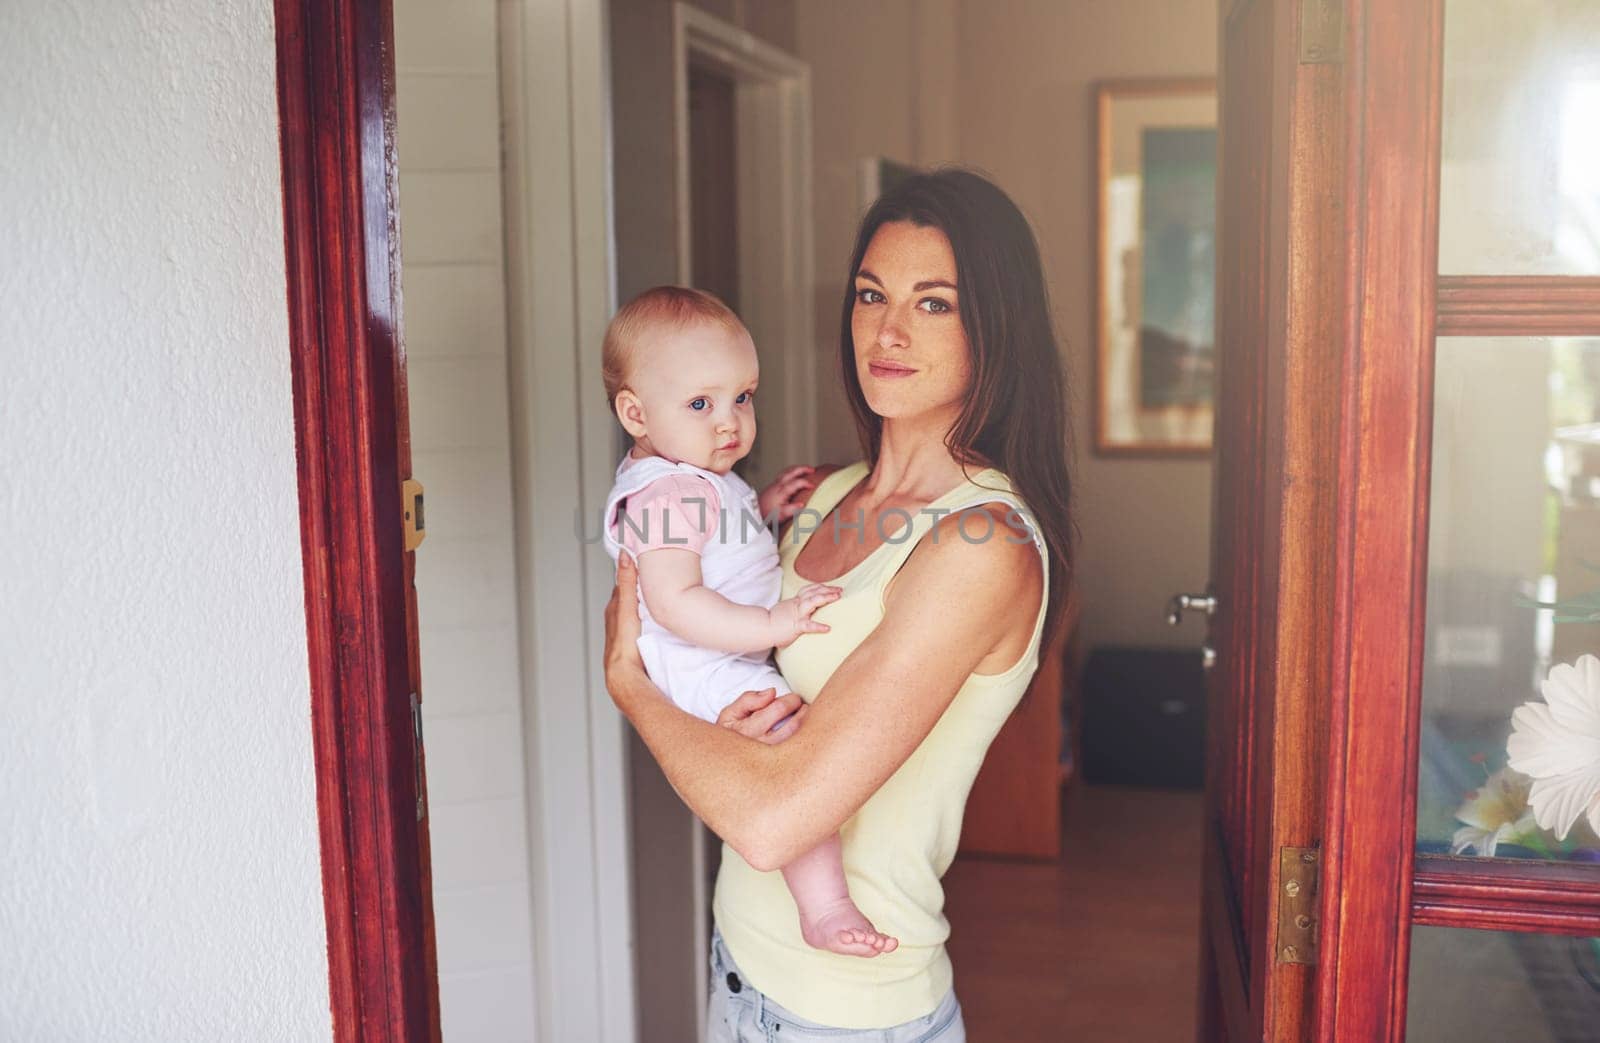 Safe at home. Cropped portrait of a young woman holding her baby daughter in a doorway. by YuriArcurs